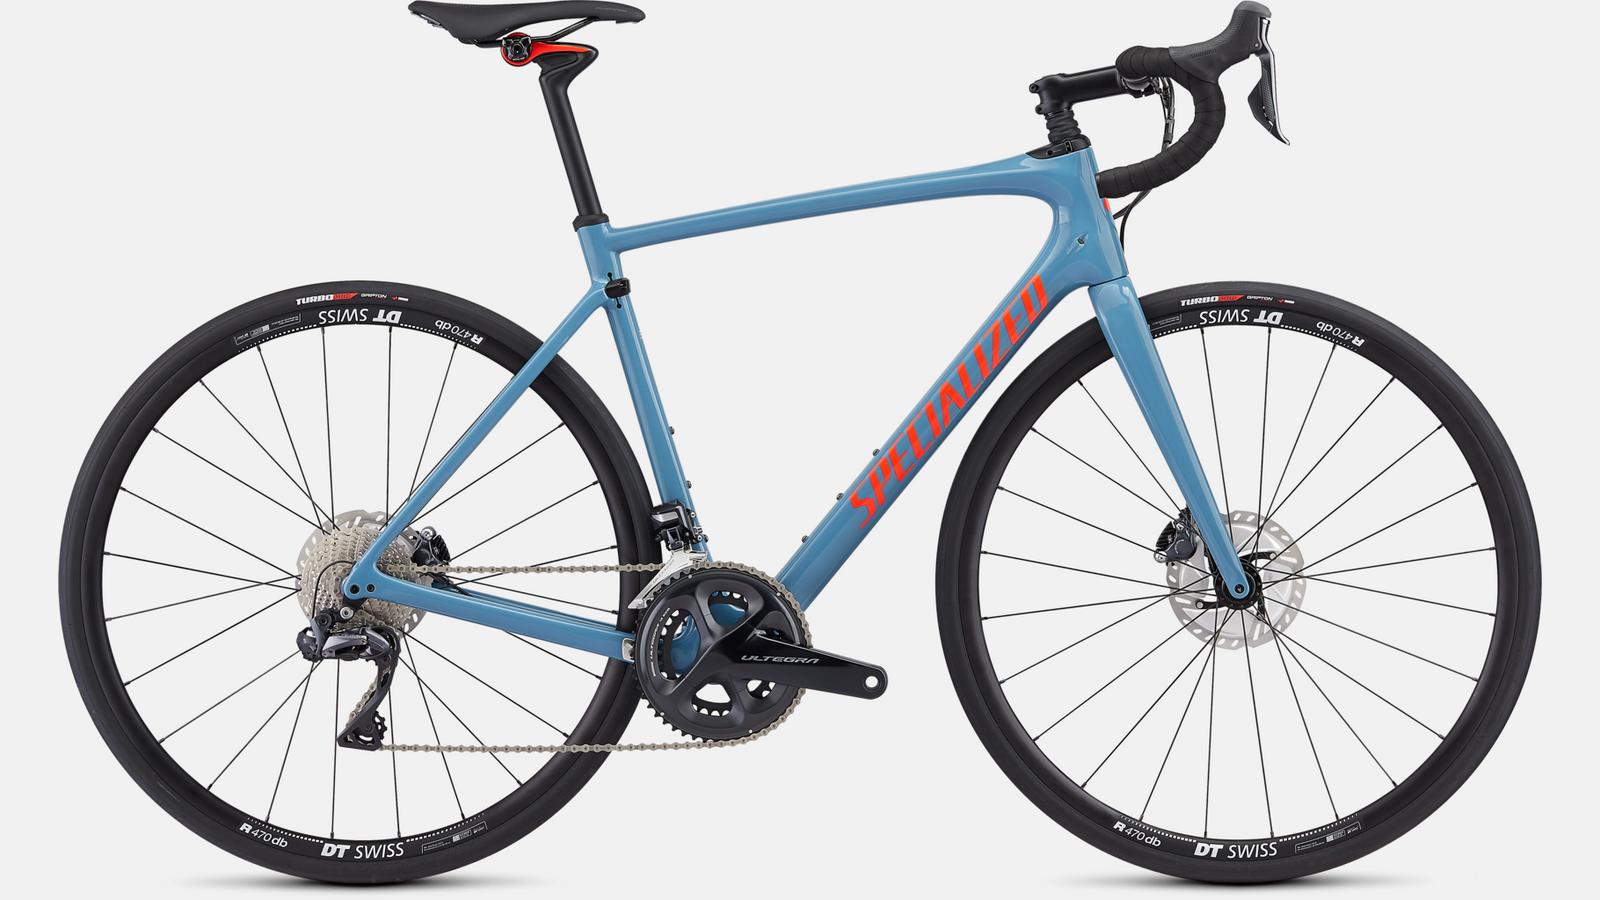 Paint for 2019 Specialized Roubaix Comp Ultegra Di2 - Gloss Storm Grey